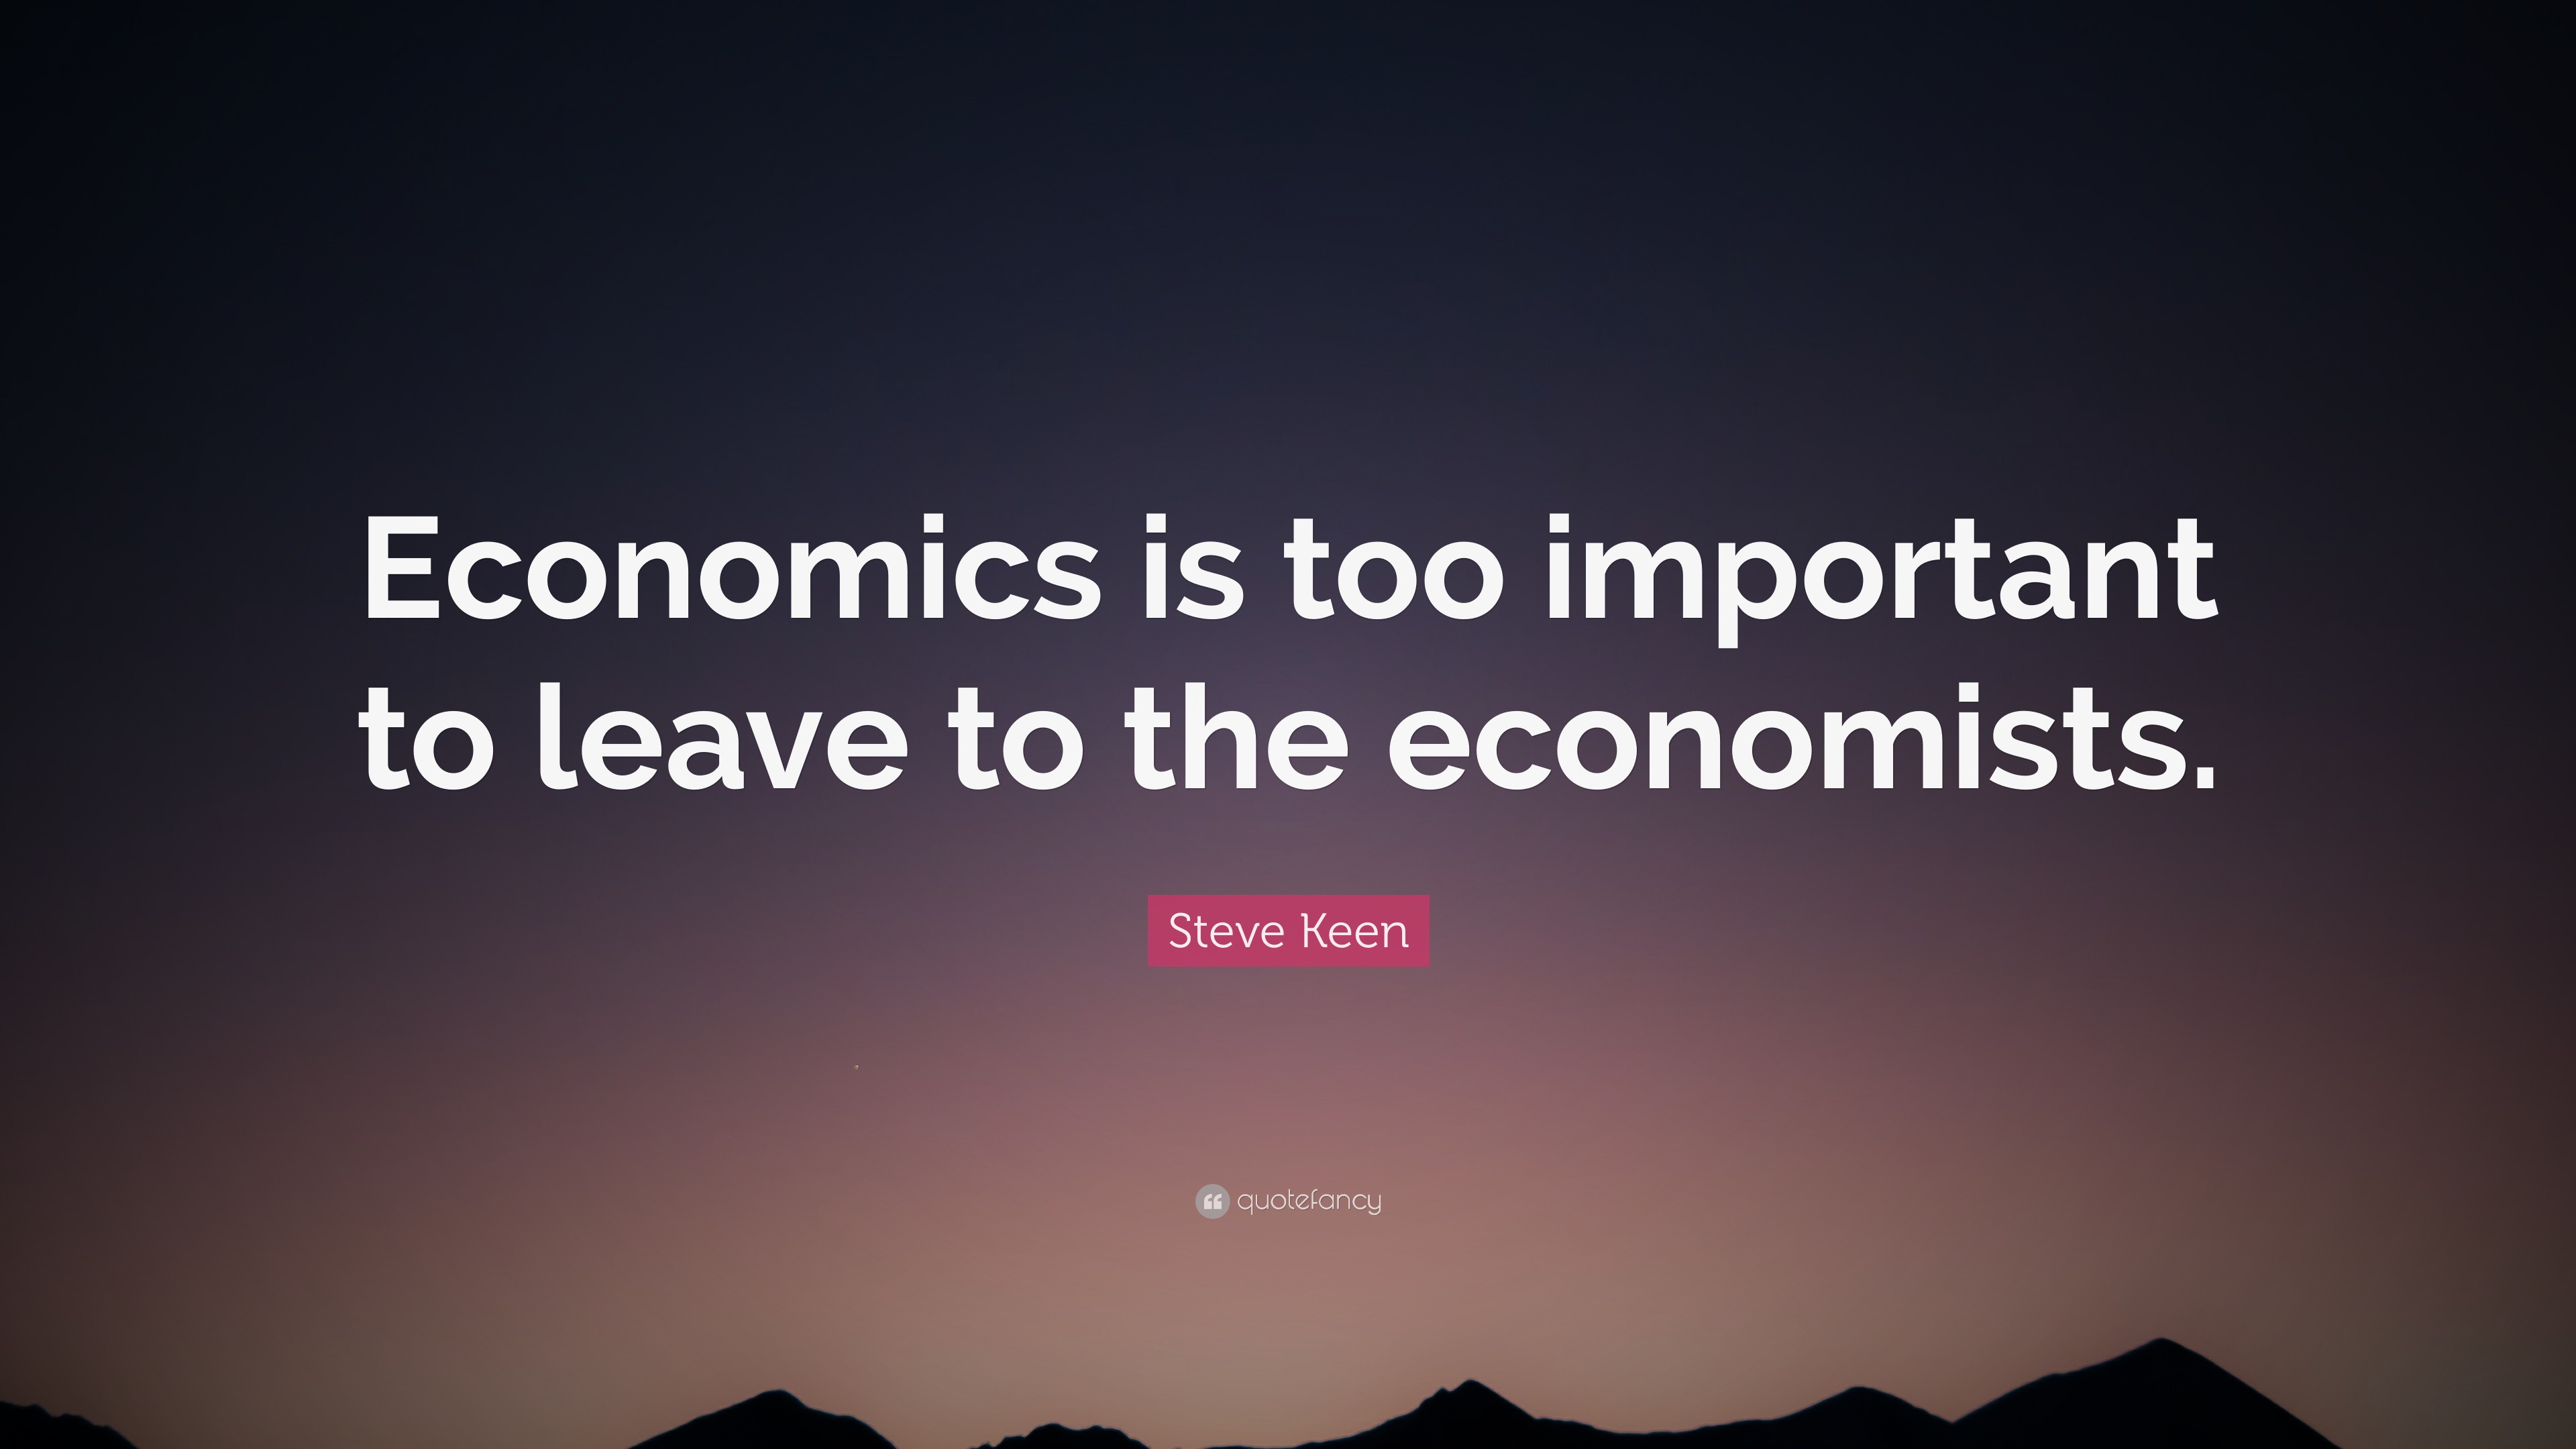 Steve Keen Quote: “Economics is too important to leave to the economists.”